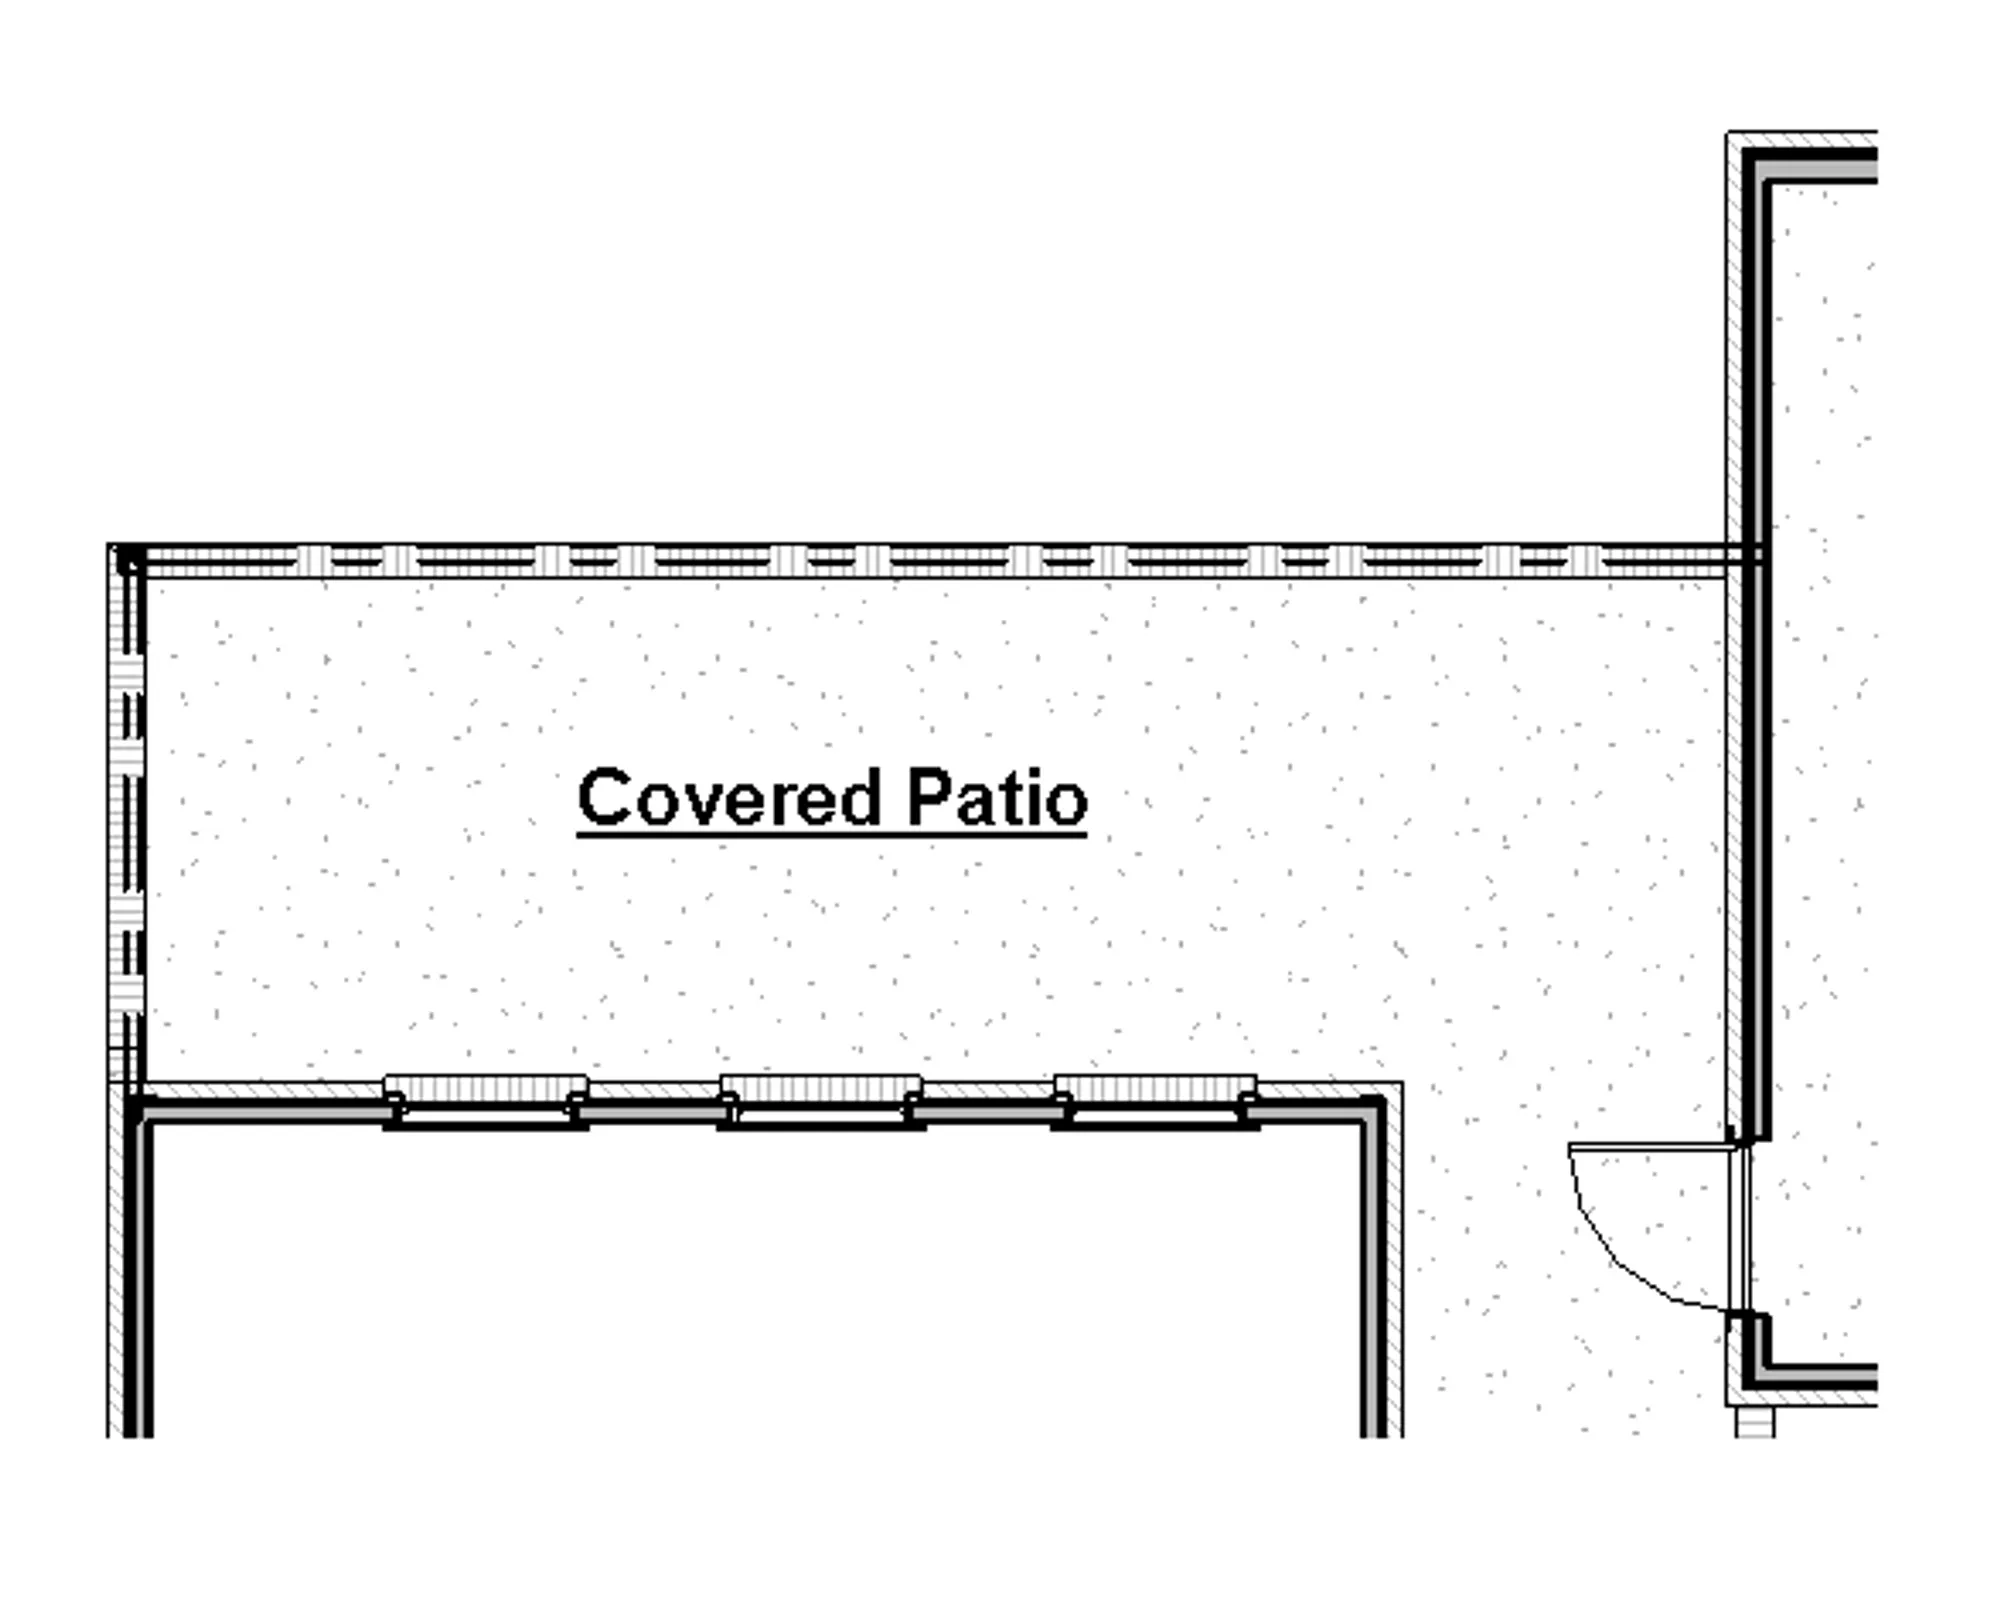 Covered Patio Extension Includes: -Approx. l 70sf Additional Covered Patio -Broom Swept Concrete Patio Floor